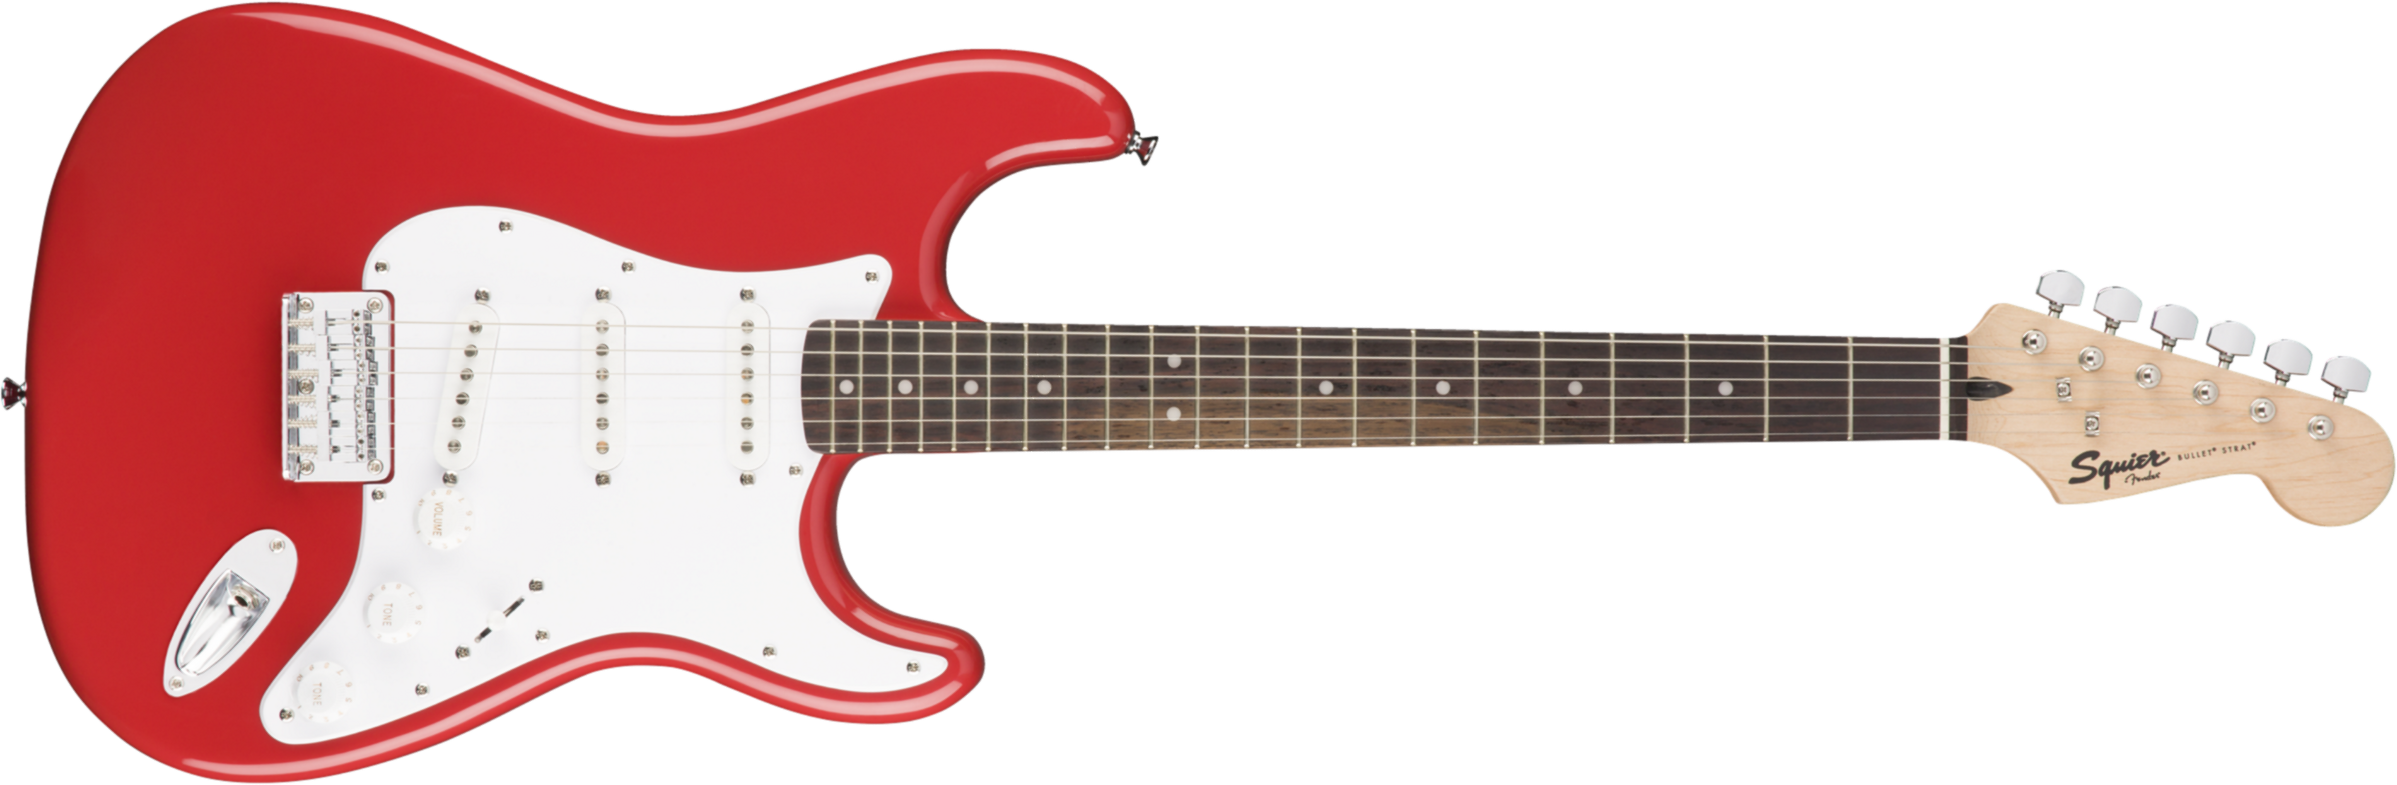 Squier Bullet Stratocaster Ht Sss (lau) - Fiesta Red - Str shape electric guitar - Main picture